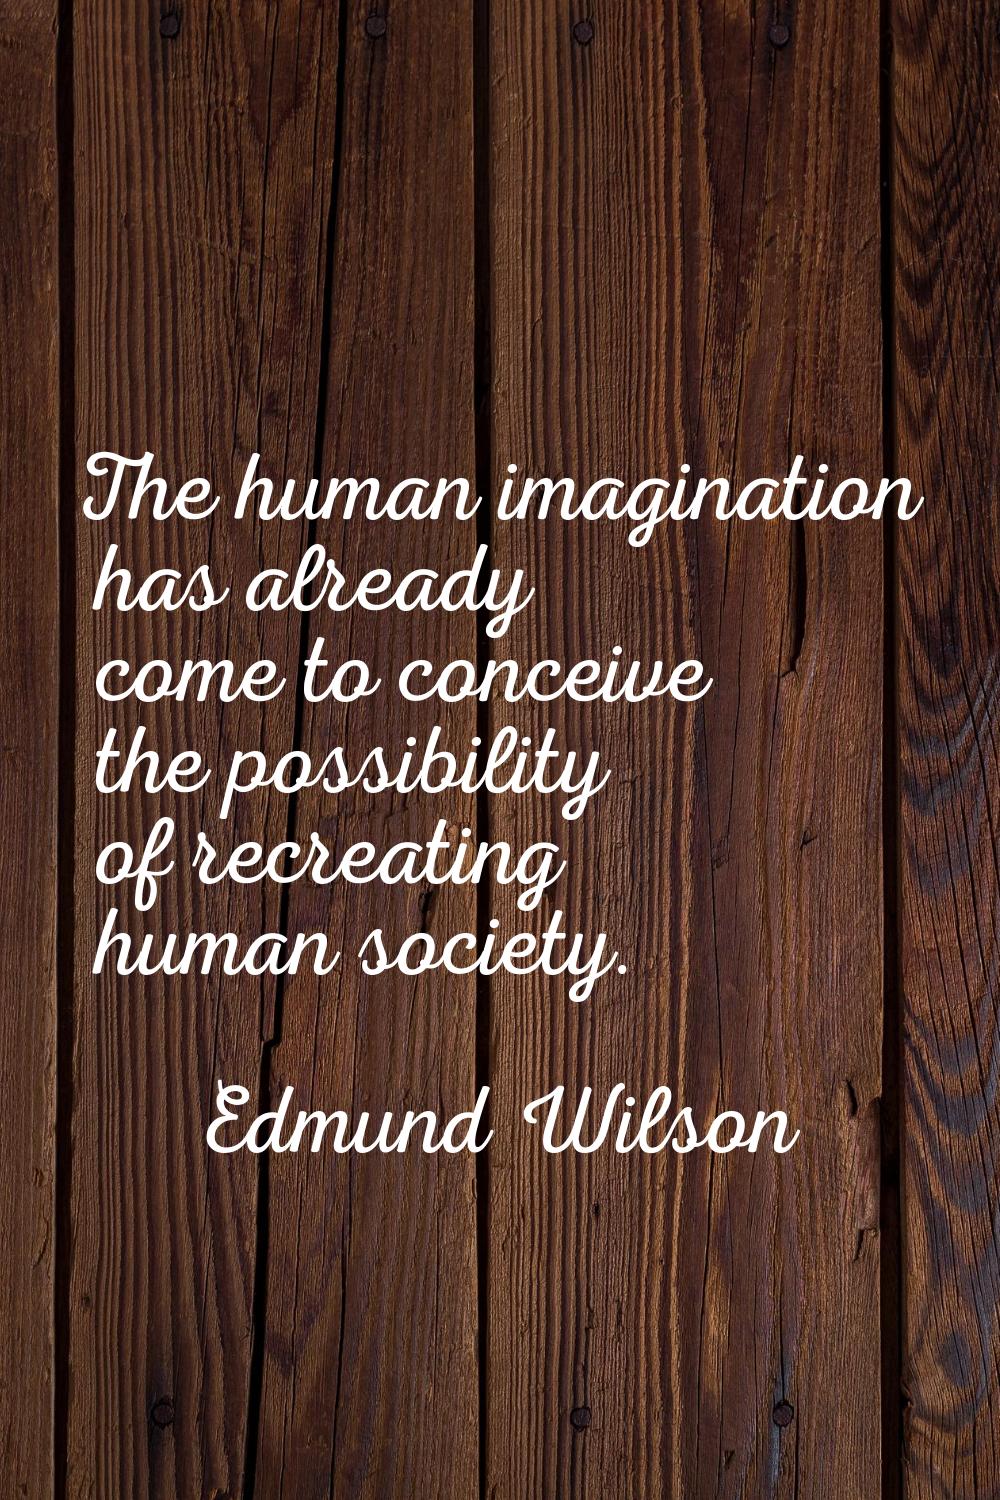 The human imagination has already come to conceive the possibility of recreating human society.